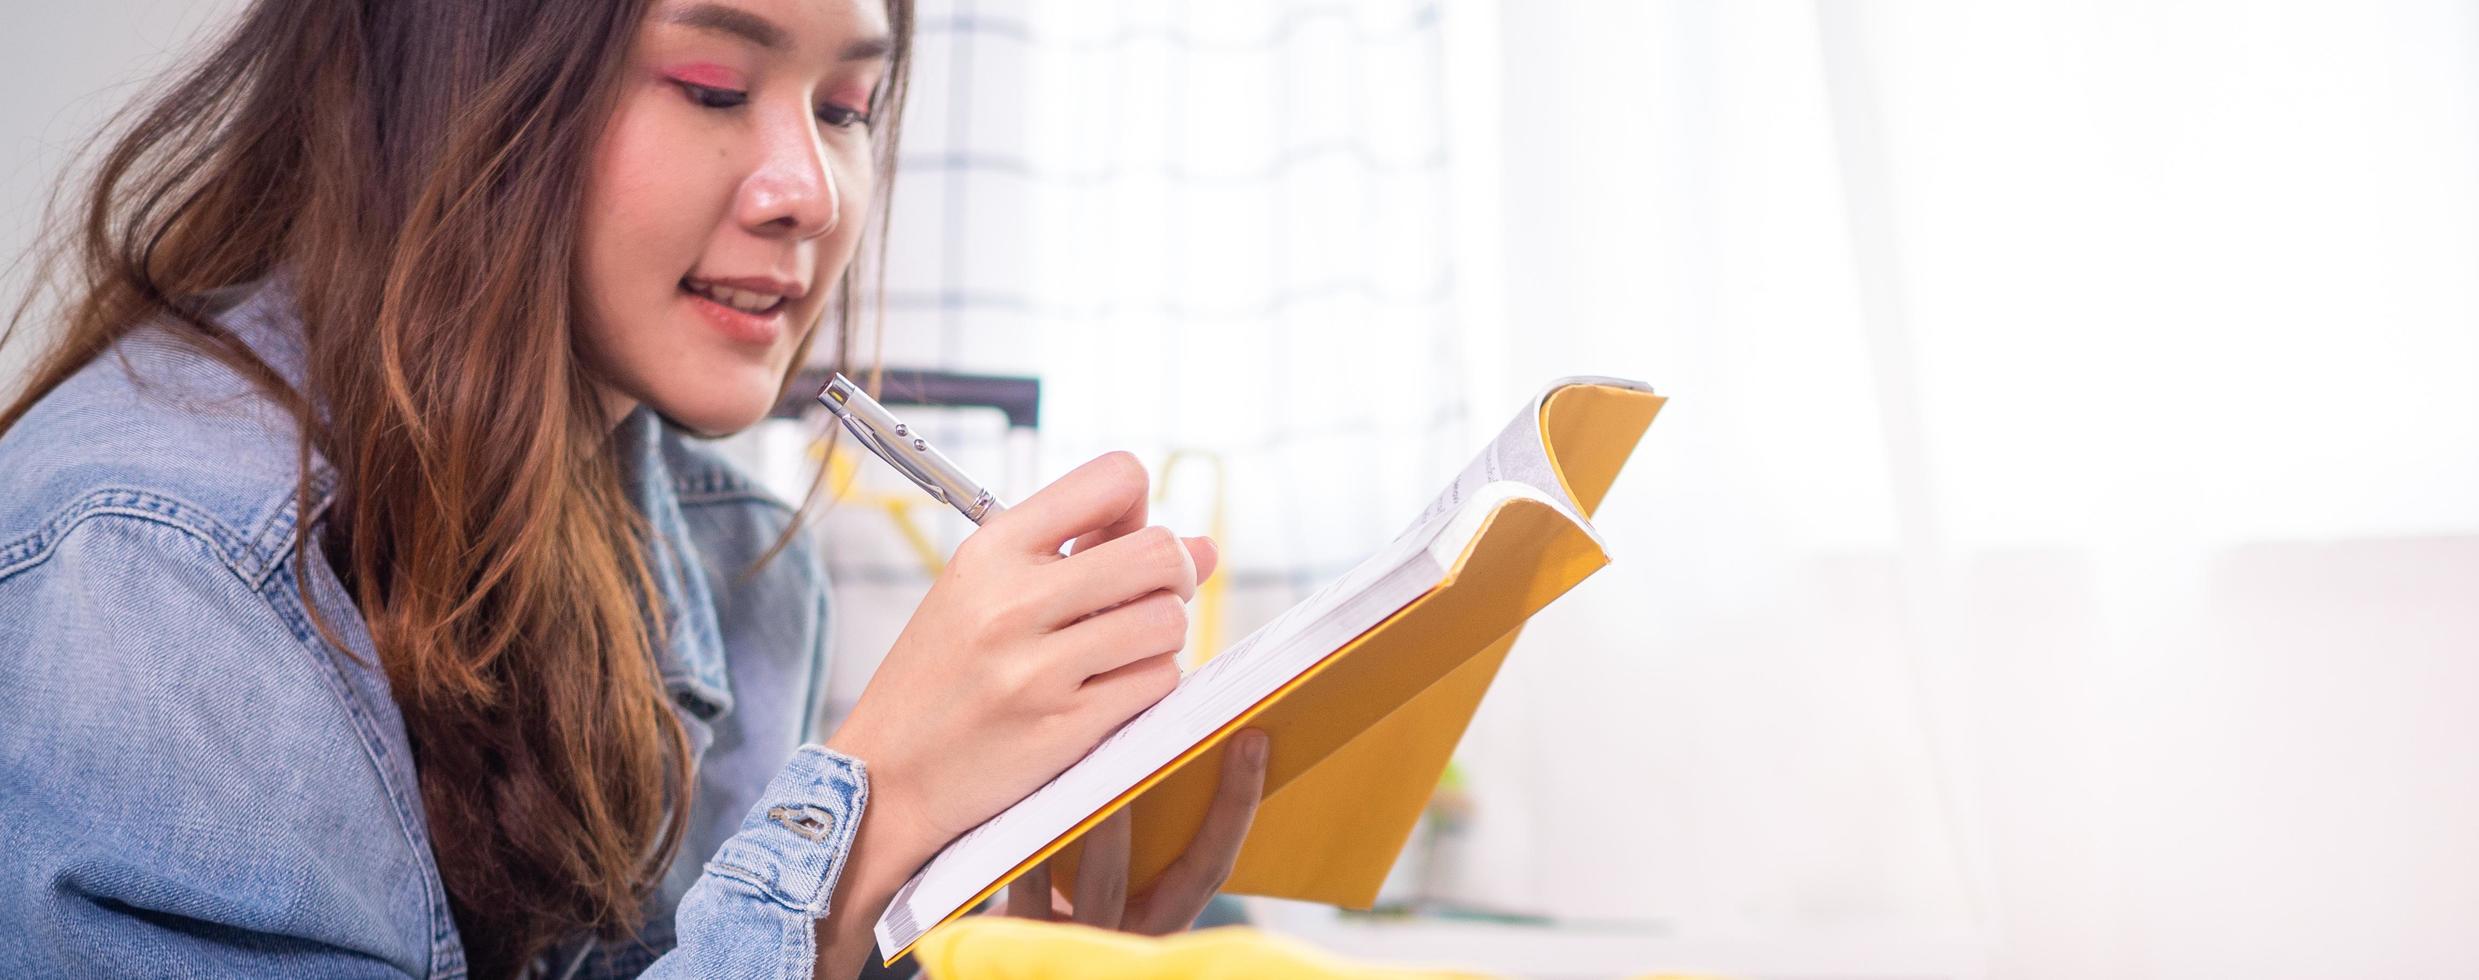 The girl writing notes with a pen in a yellow booklet Happily being in the room at home. photo